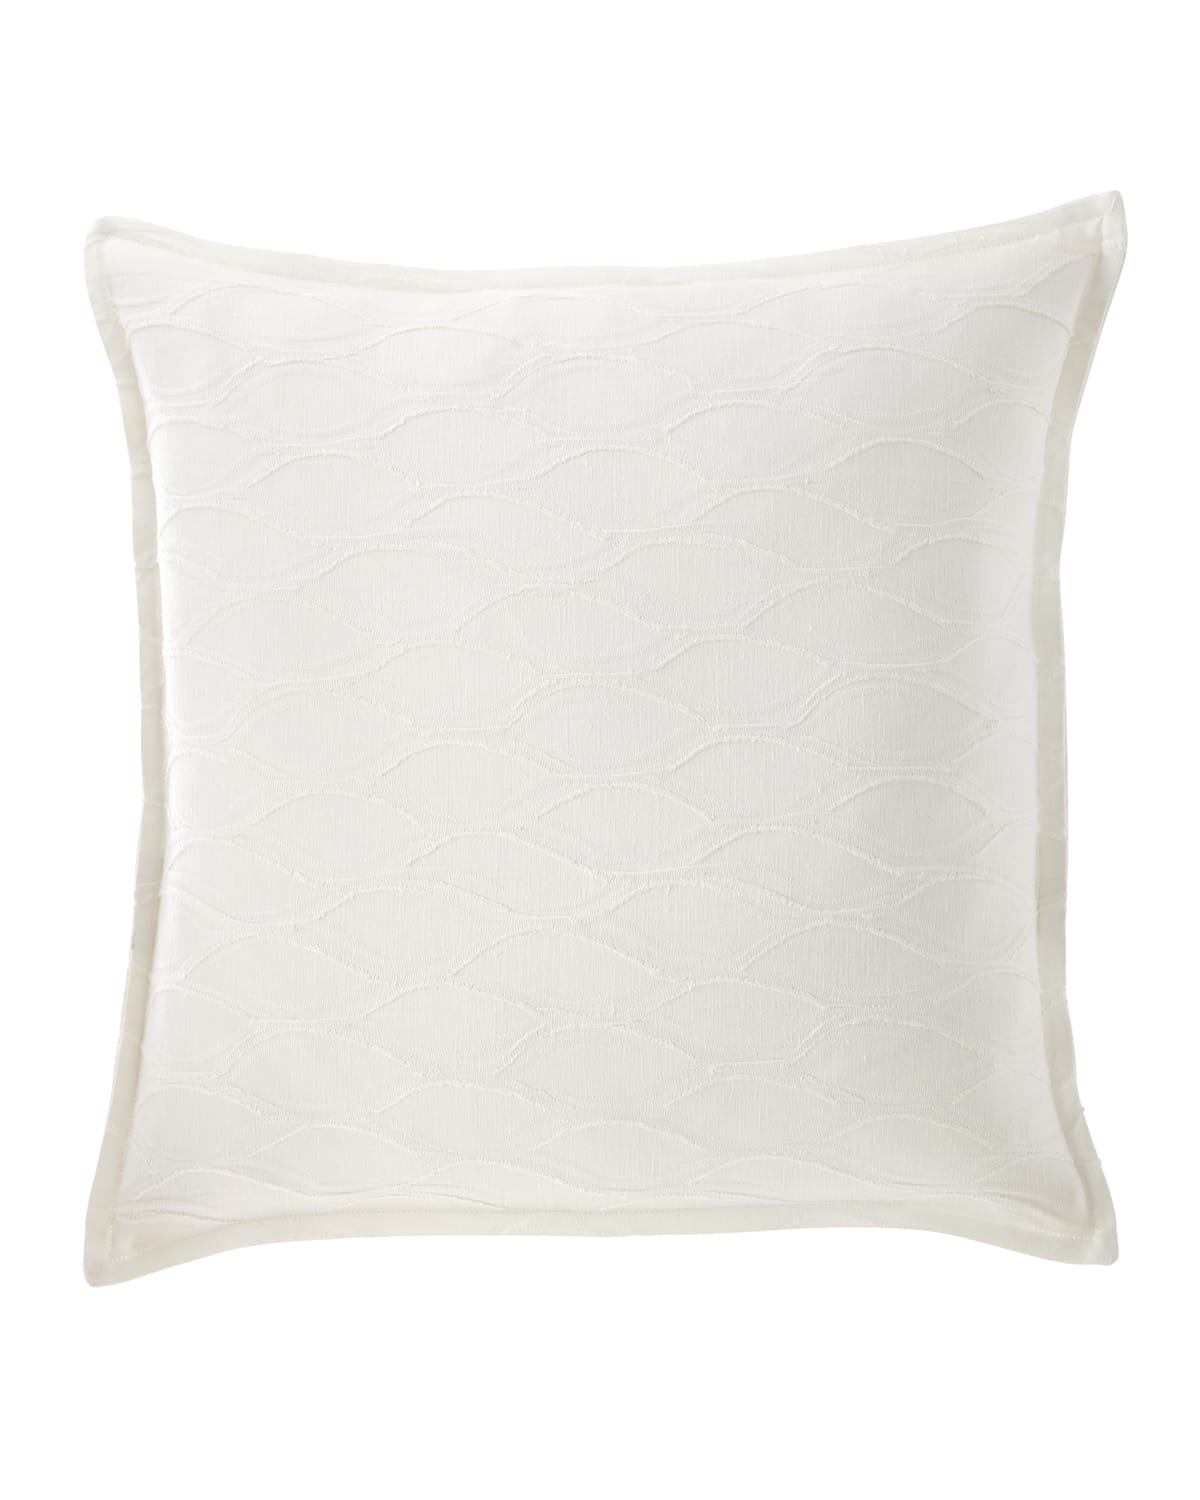 Image Isabella Collection by Kathy Fielder Lisette Pillow, 22"Sq.